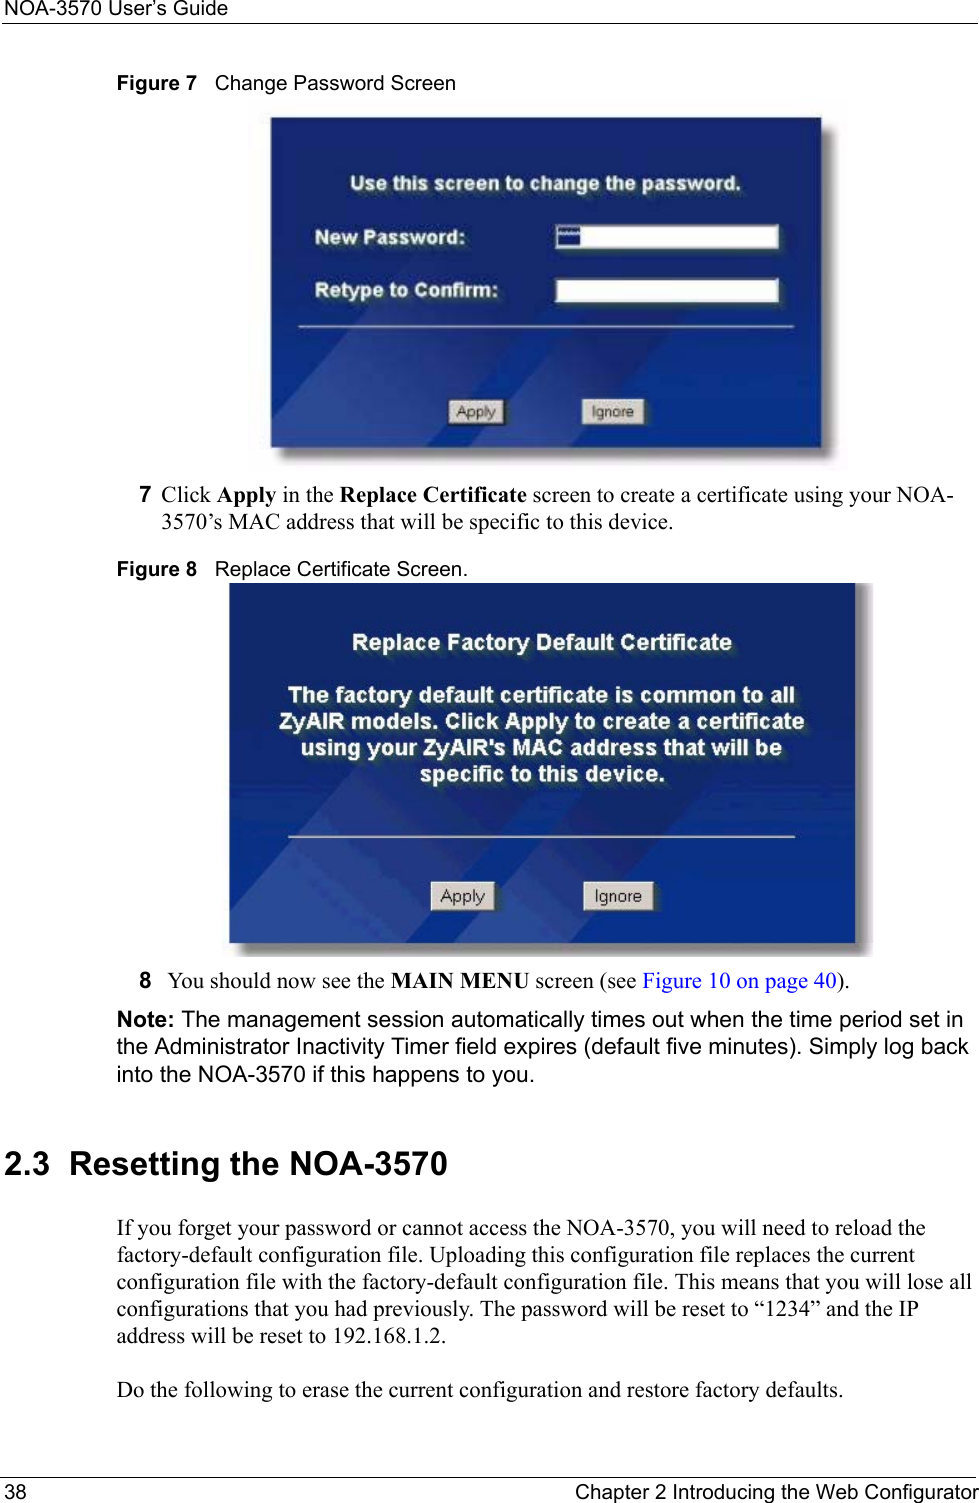 NOA-3570 User’s Guide38 Chapter 2 Introducing the Web ConfiguratorFigure 7   Change Password Screen7Click Apply in the Replace Certificate screen to create a certificate using your NOA-3570’s MAC address that will be specific to this device.Figure 8   Replace Certificate Screen.8 You should now see the MAIN MENU screen (see Figure 10 on page 40).Note: The management session automatically times out when the time period set in the Administrator Inactivity Timer field expires (default five minutes). Simply log back into the NOA-3570 if this happens to you.2.3  Resetting the NOA-3570If you forget your password or cannot access the NOA-3570, you will need to reload the factory-default configuration file. Uploading this configuration file replaces the current configuration file with the factory-default configuration file. This means that you will lose all configurations that you had previously. The password will be reset to “1234” and the IP address will be reset to 192.168.1.2.Do the following to erase the current configuration and restore factory defaults.